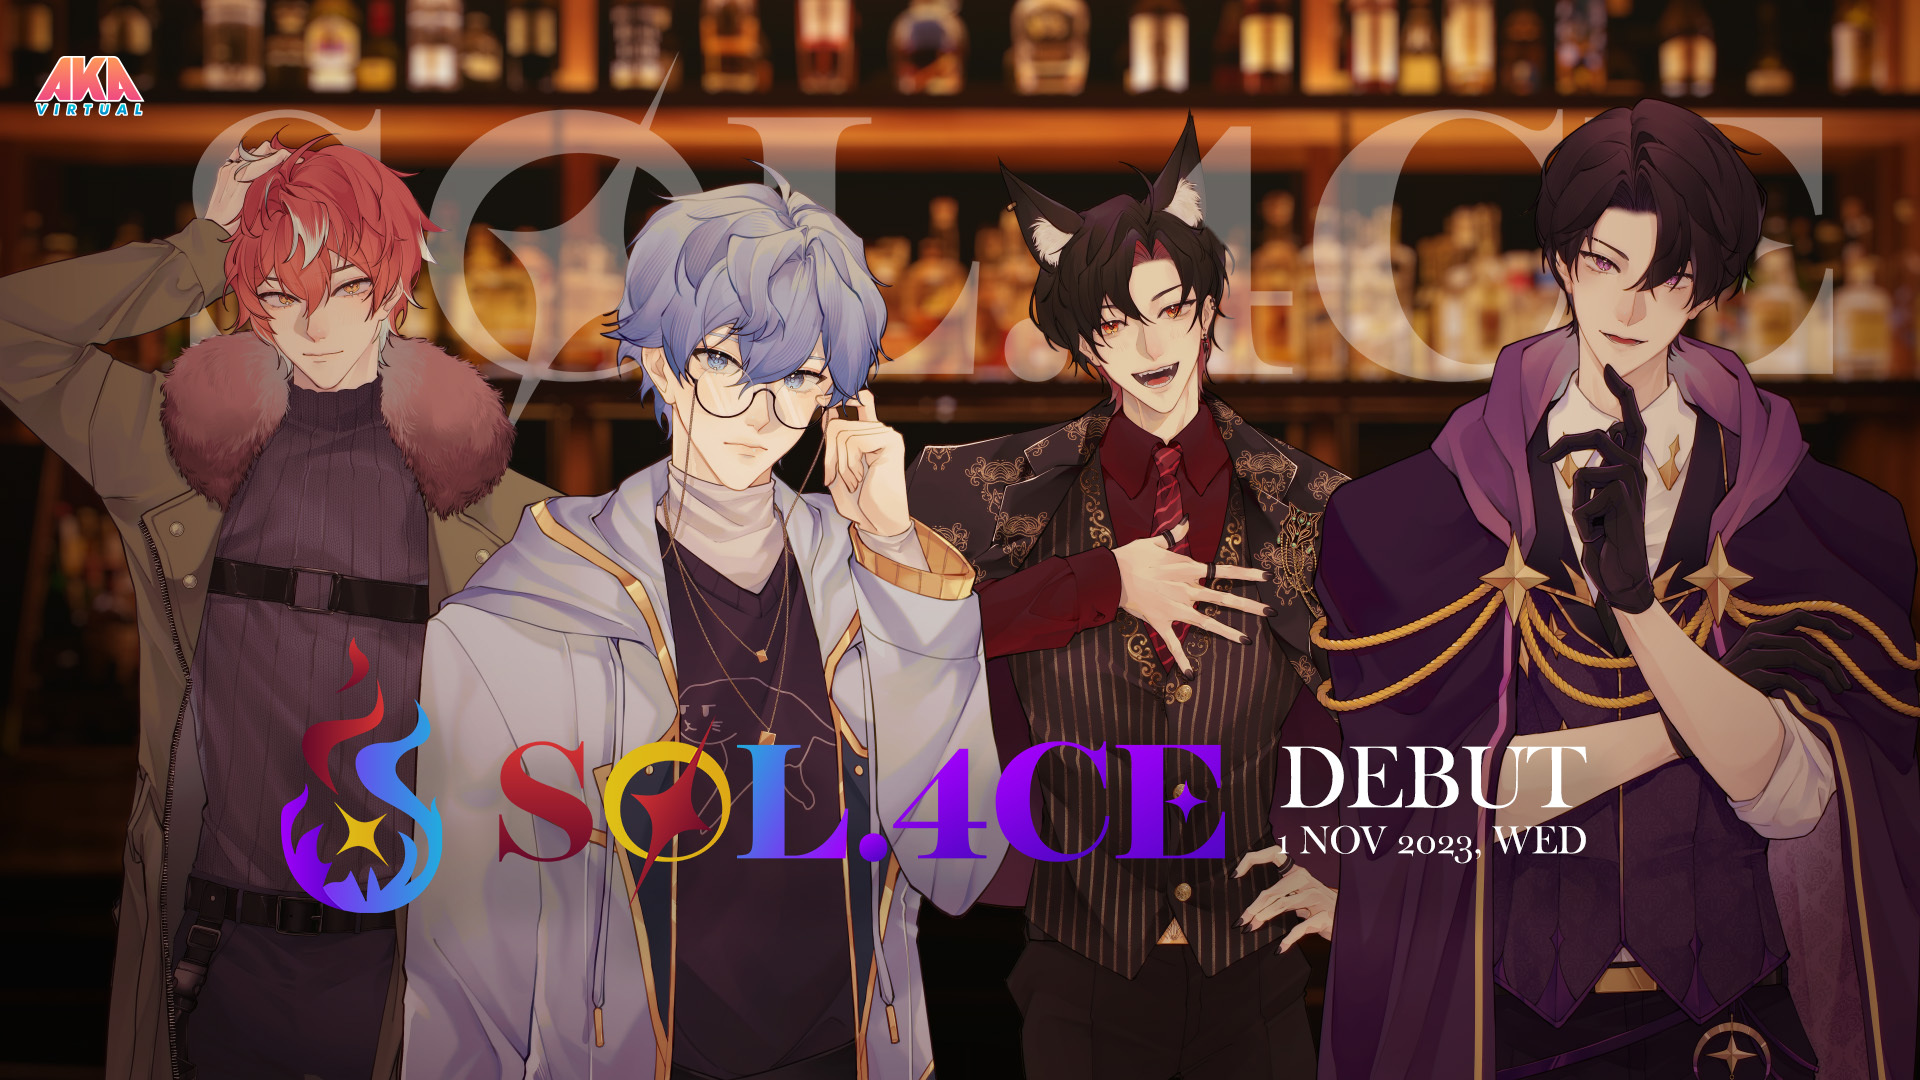 AKA Virtual Launches Its First Male VTuber Group SOL.4CE